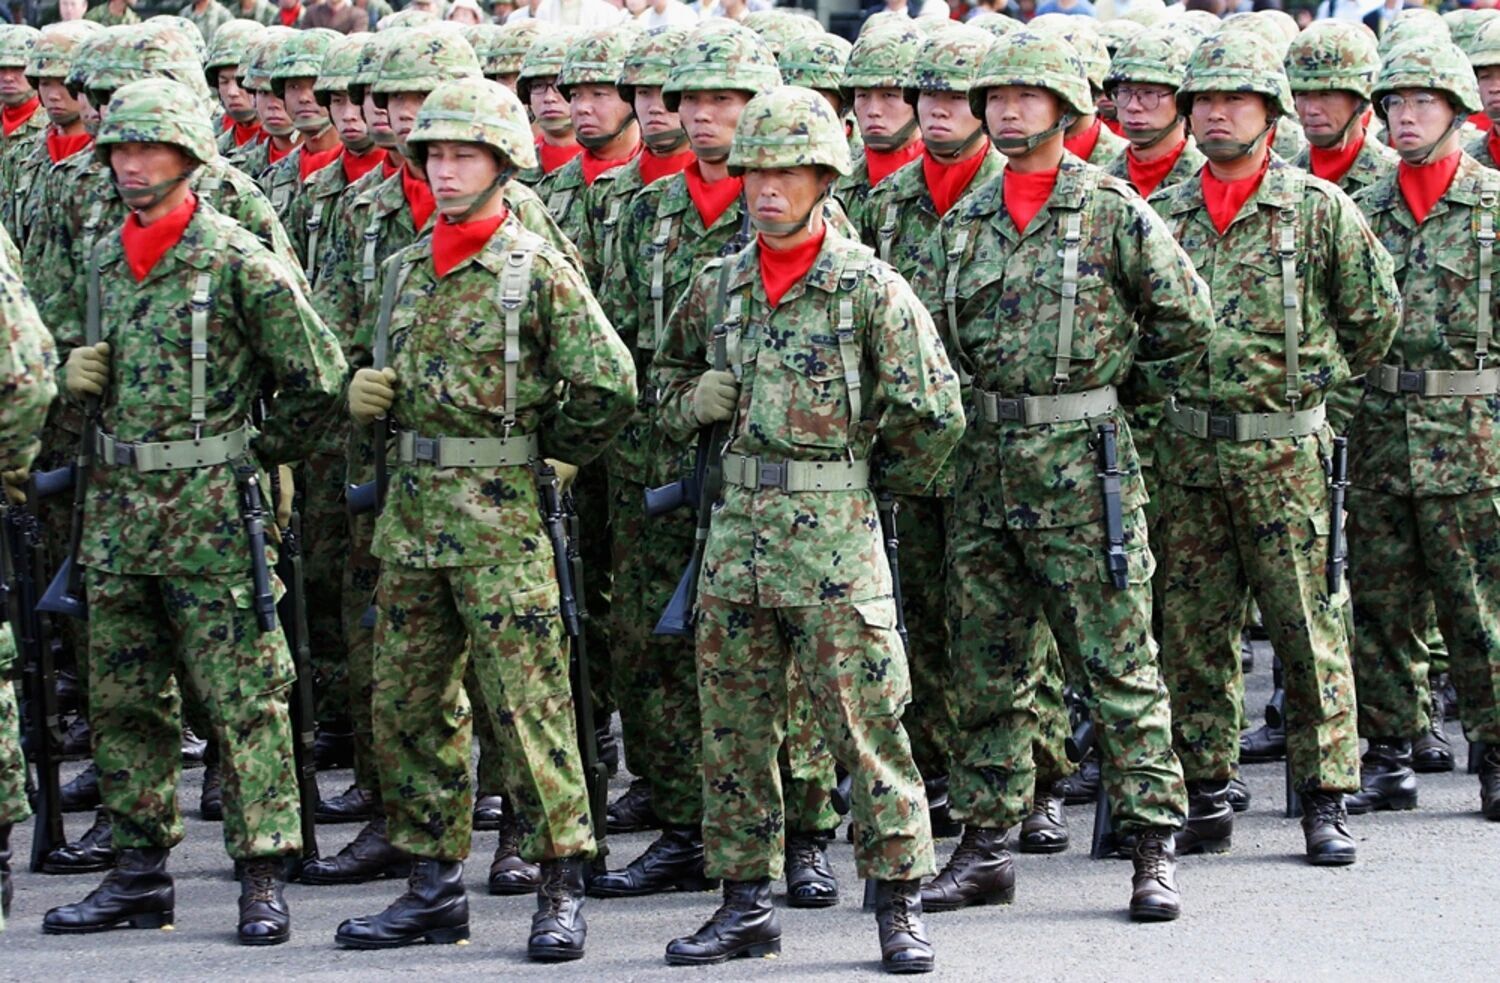 Japan's military will allow long hair and tattoos: what's happening